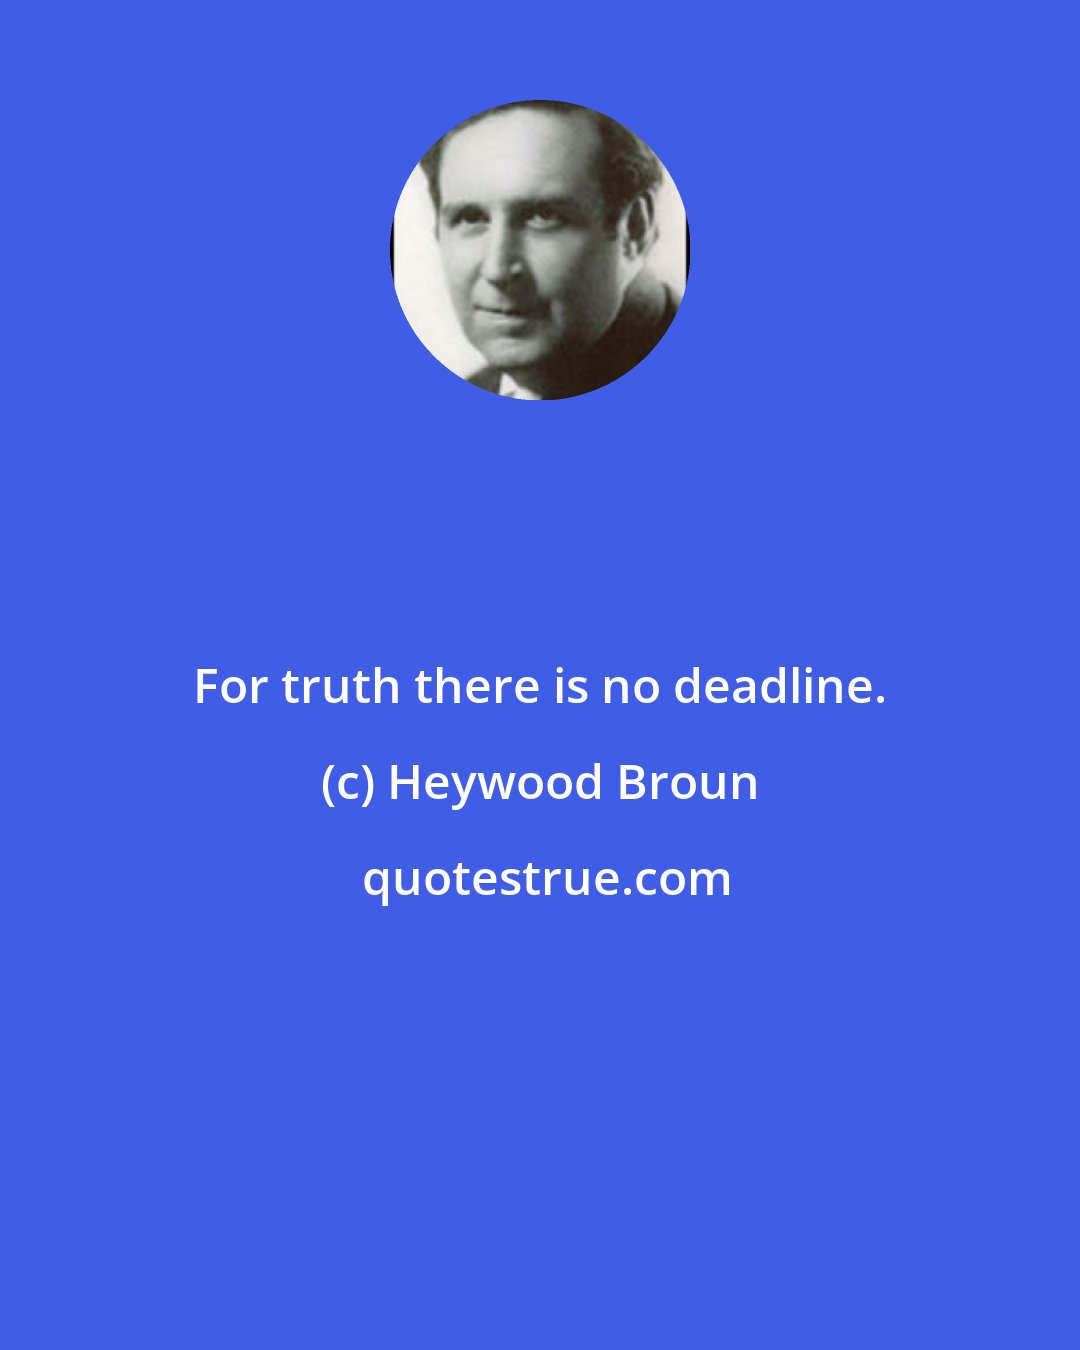 Heywood Broun: For truth there is no deadline.